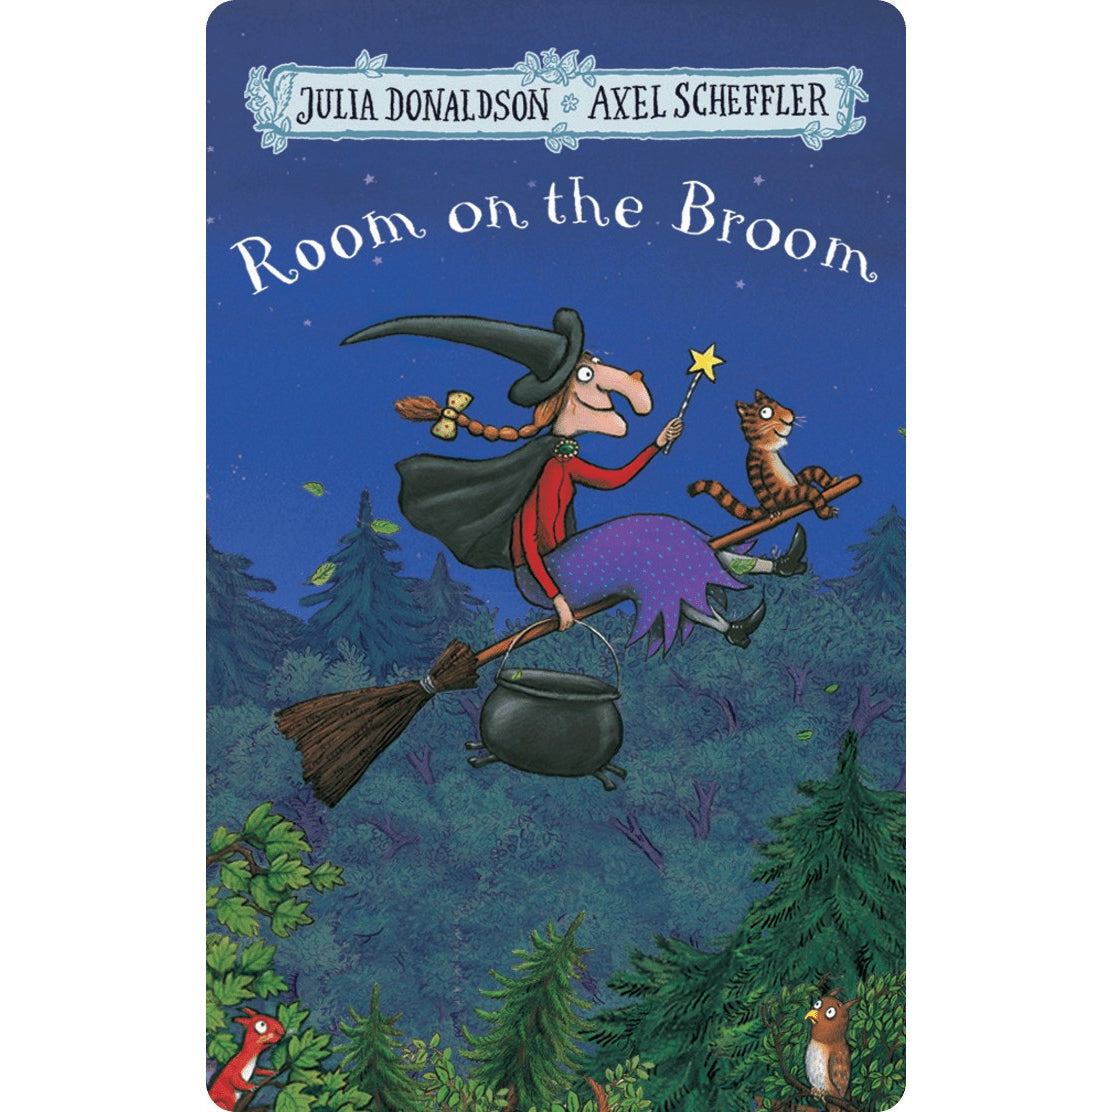 Yoto Card - Room on the Broom - Julia Donaldson - Child Friendly Audio Story Card for the Yoto Player